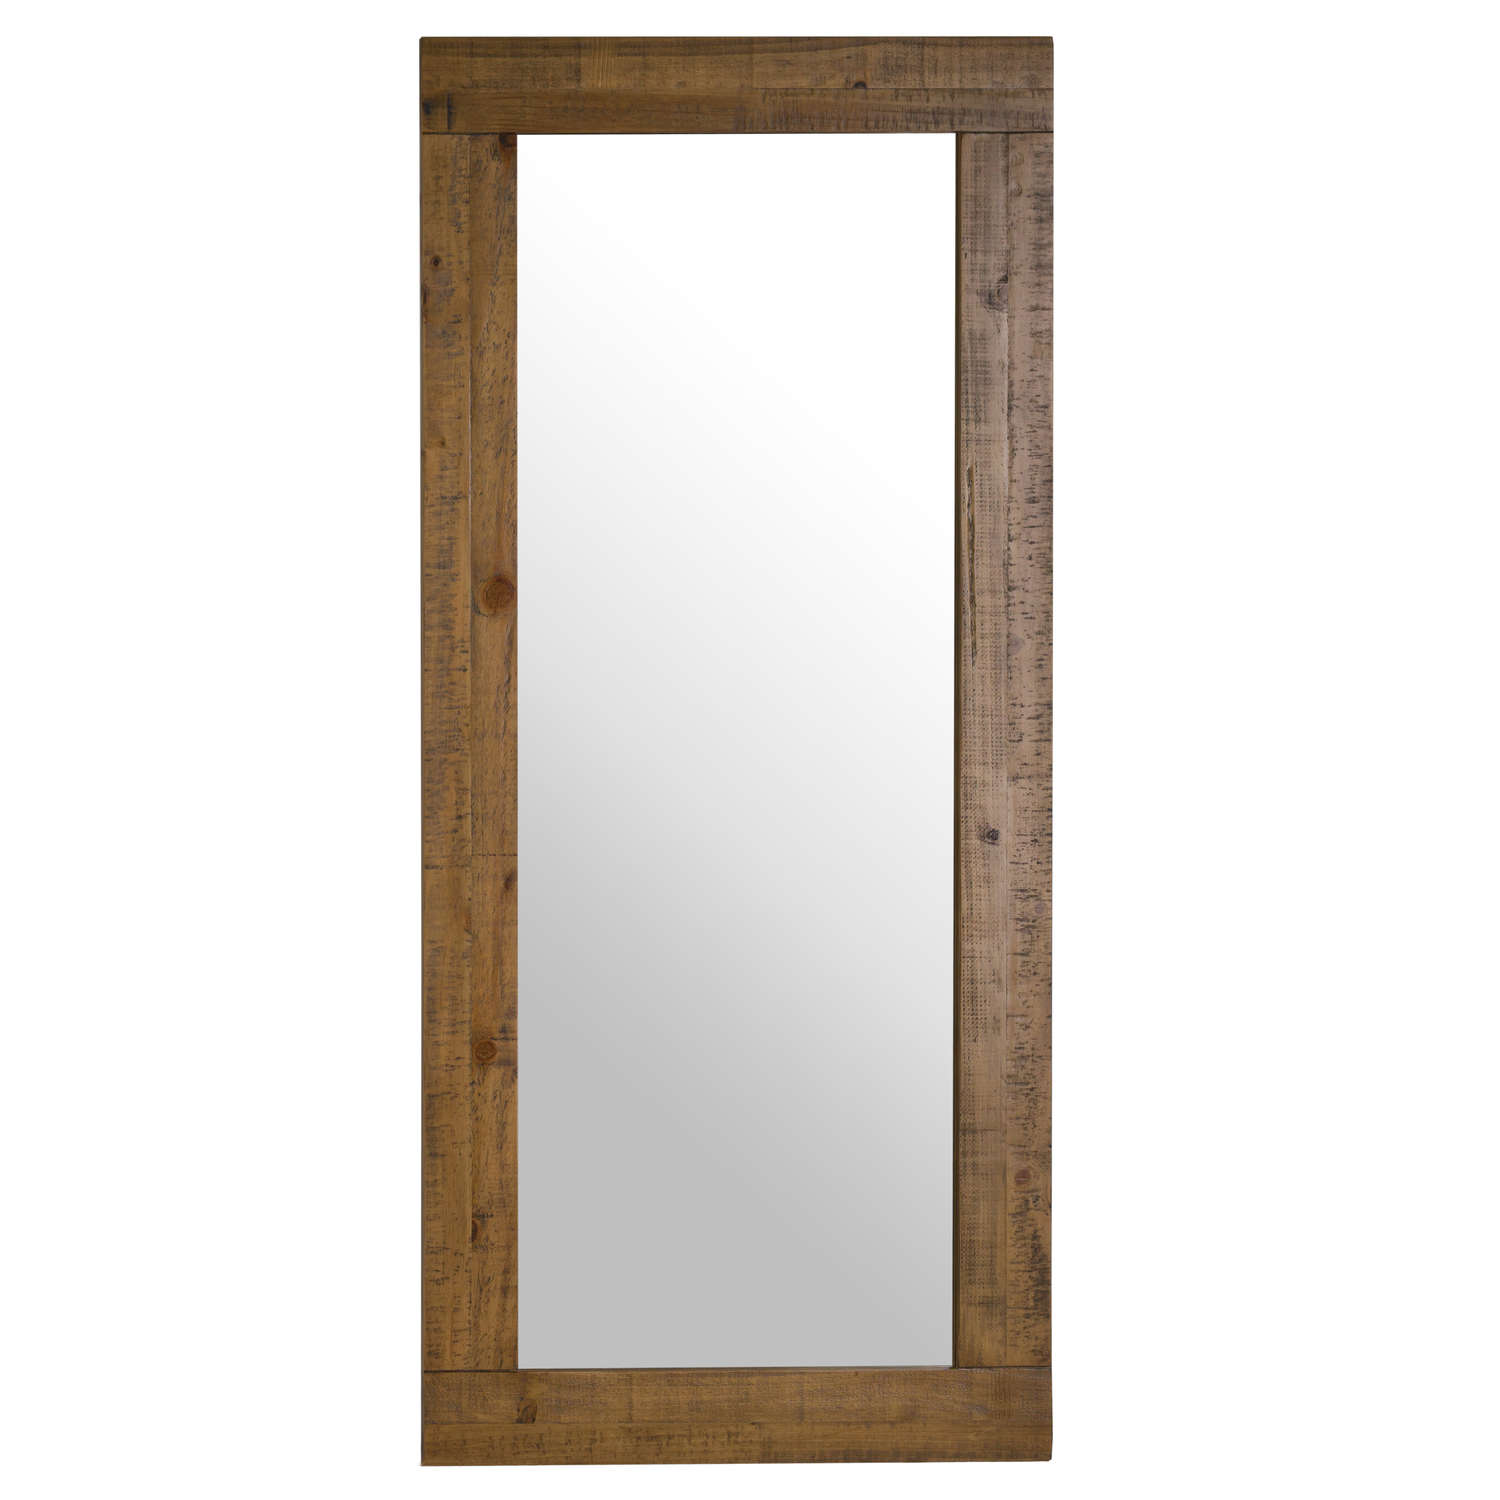 The Deanery Collection Large Plank Mirror